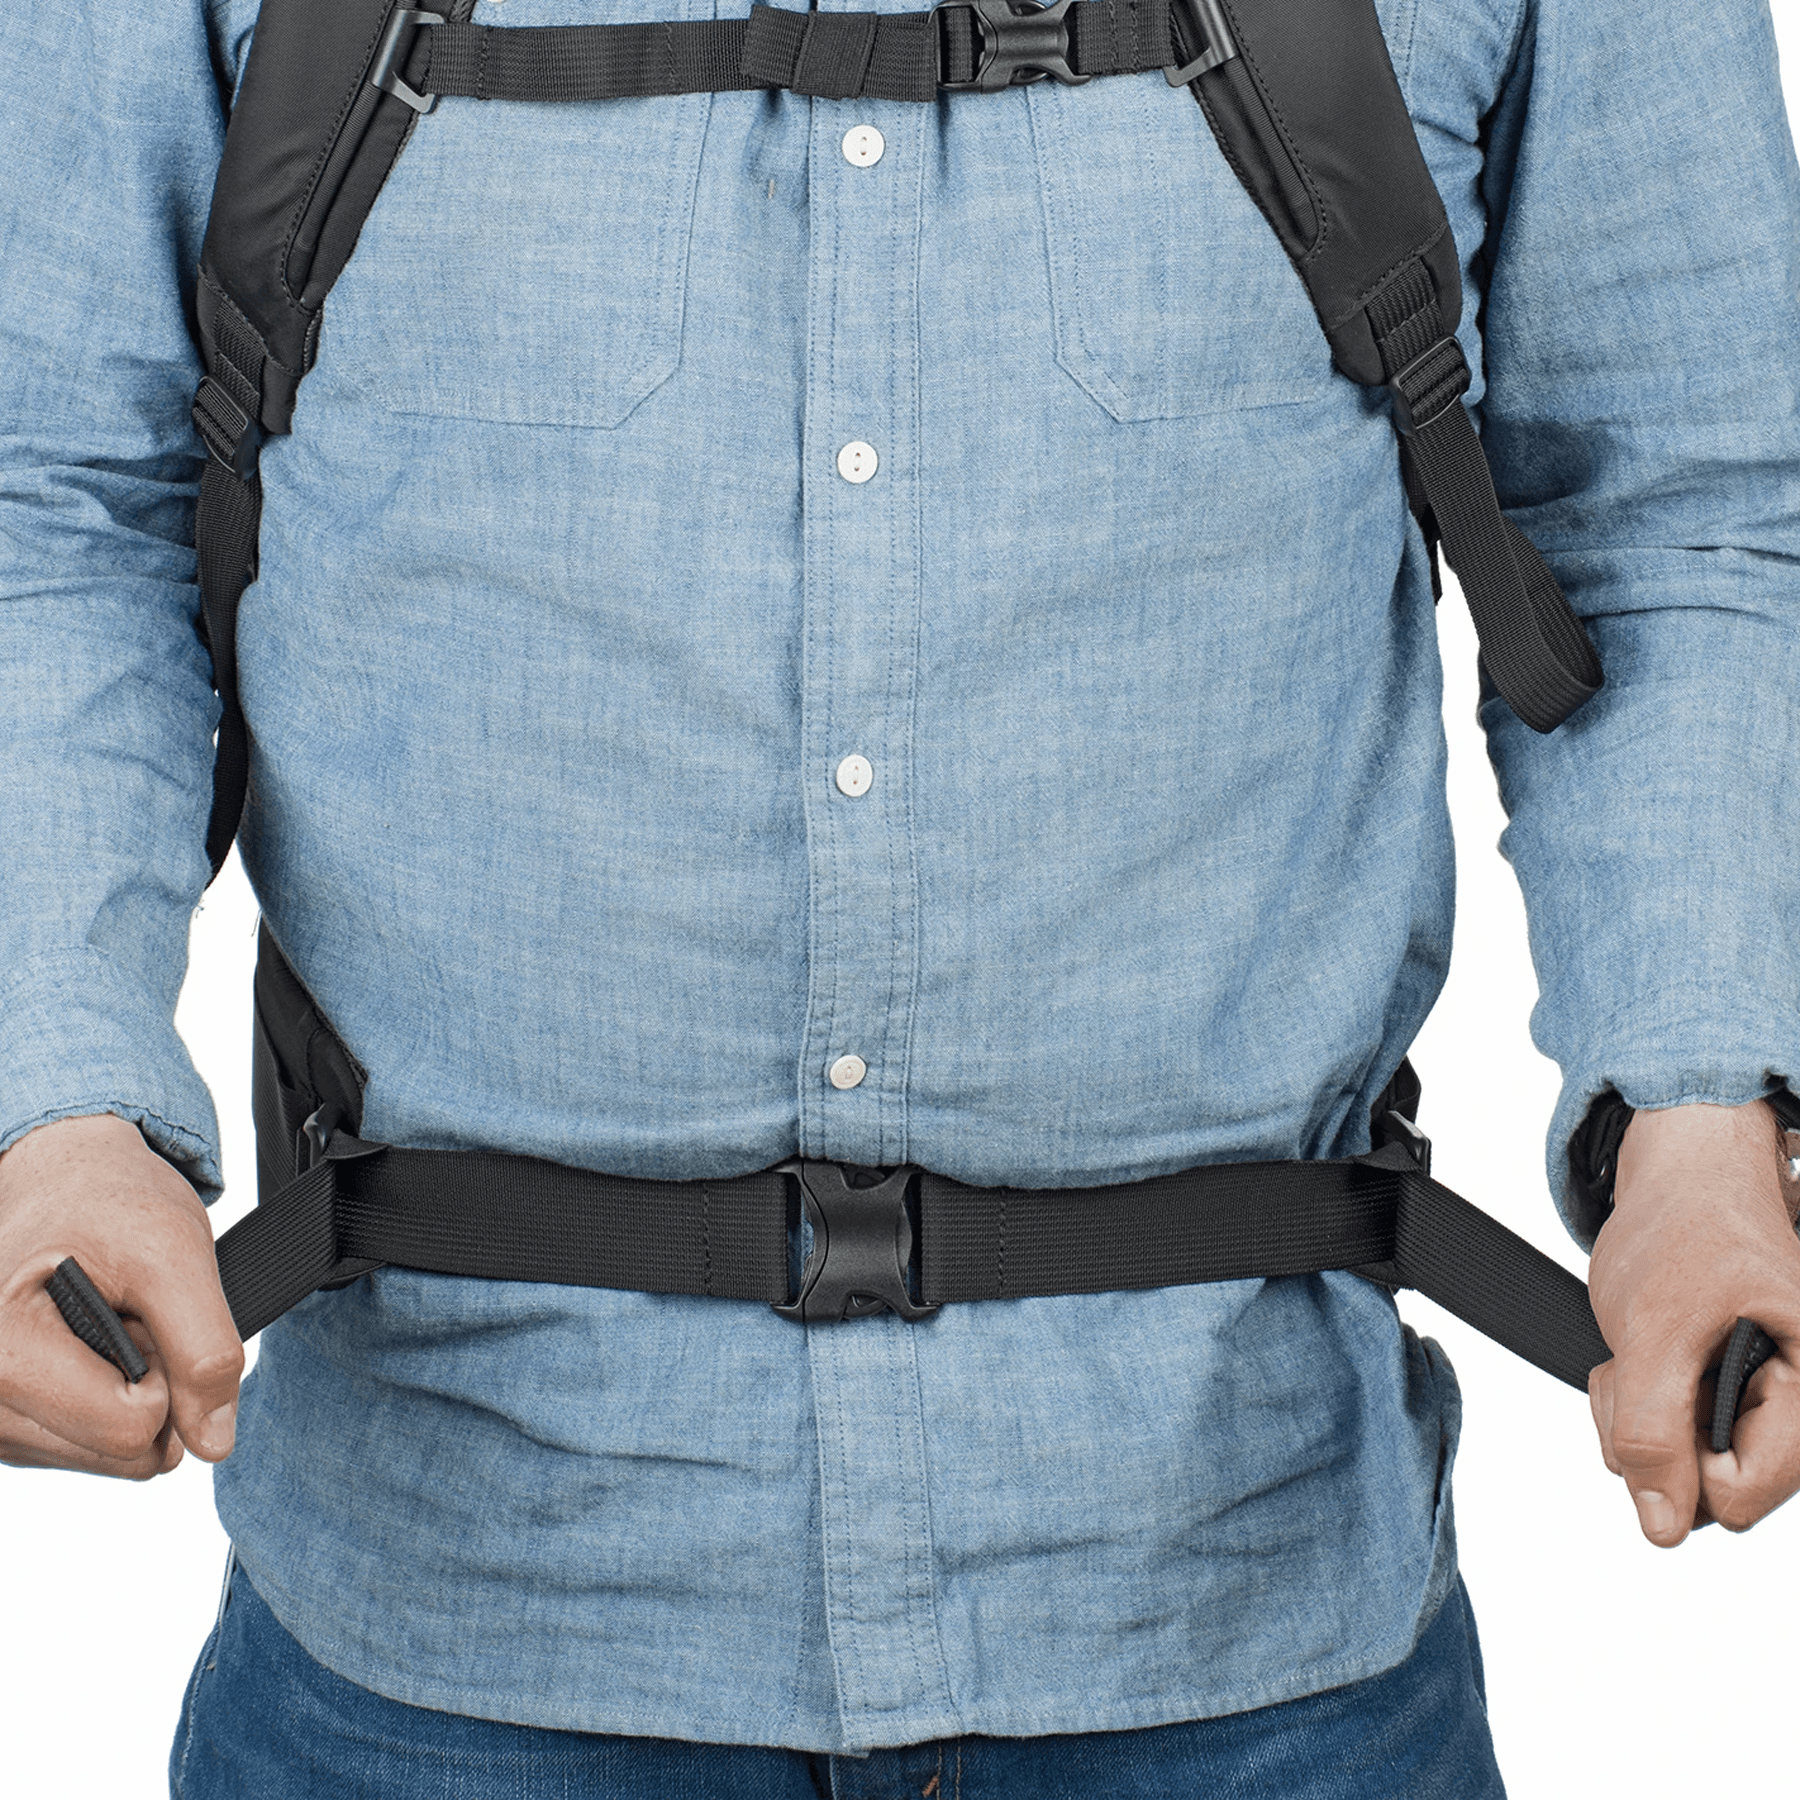 Quick fit waist belt adjustment for rapid and convenient fitting